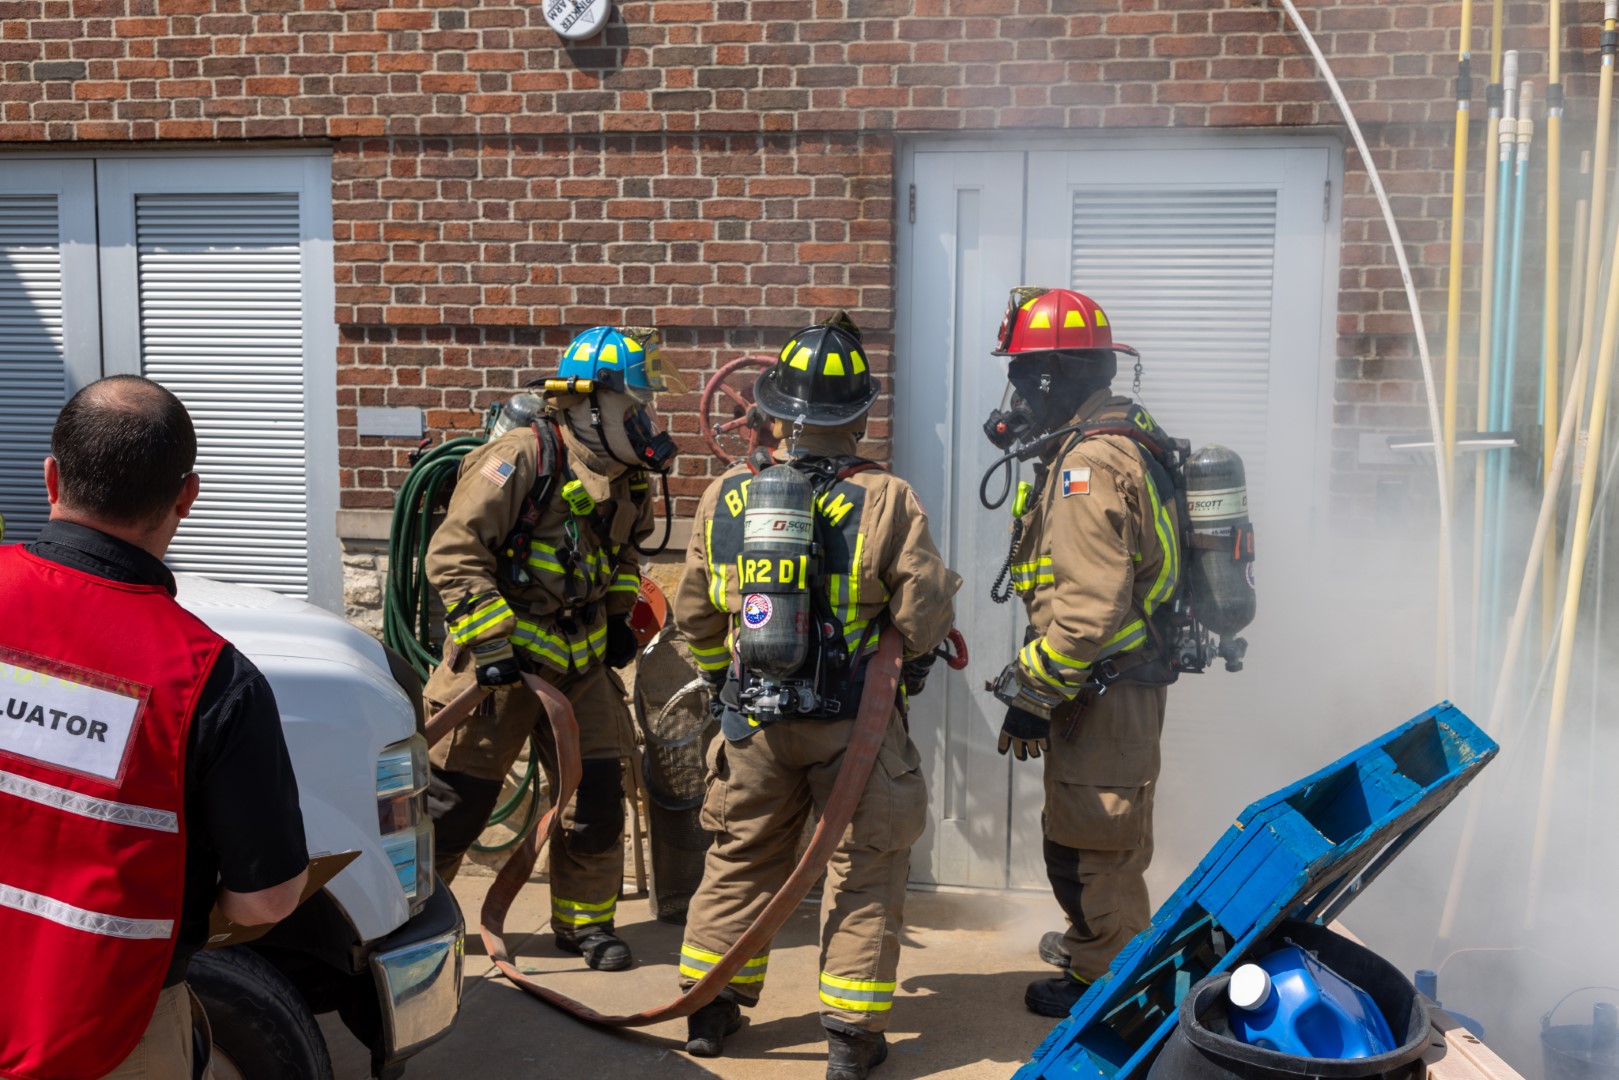 firefighters preparing to enter a building while being evaluated during a drill